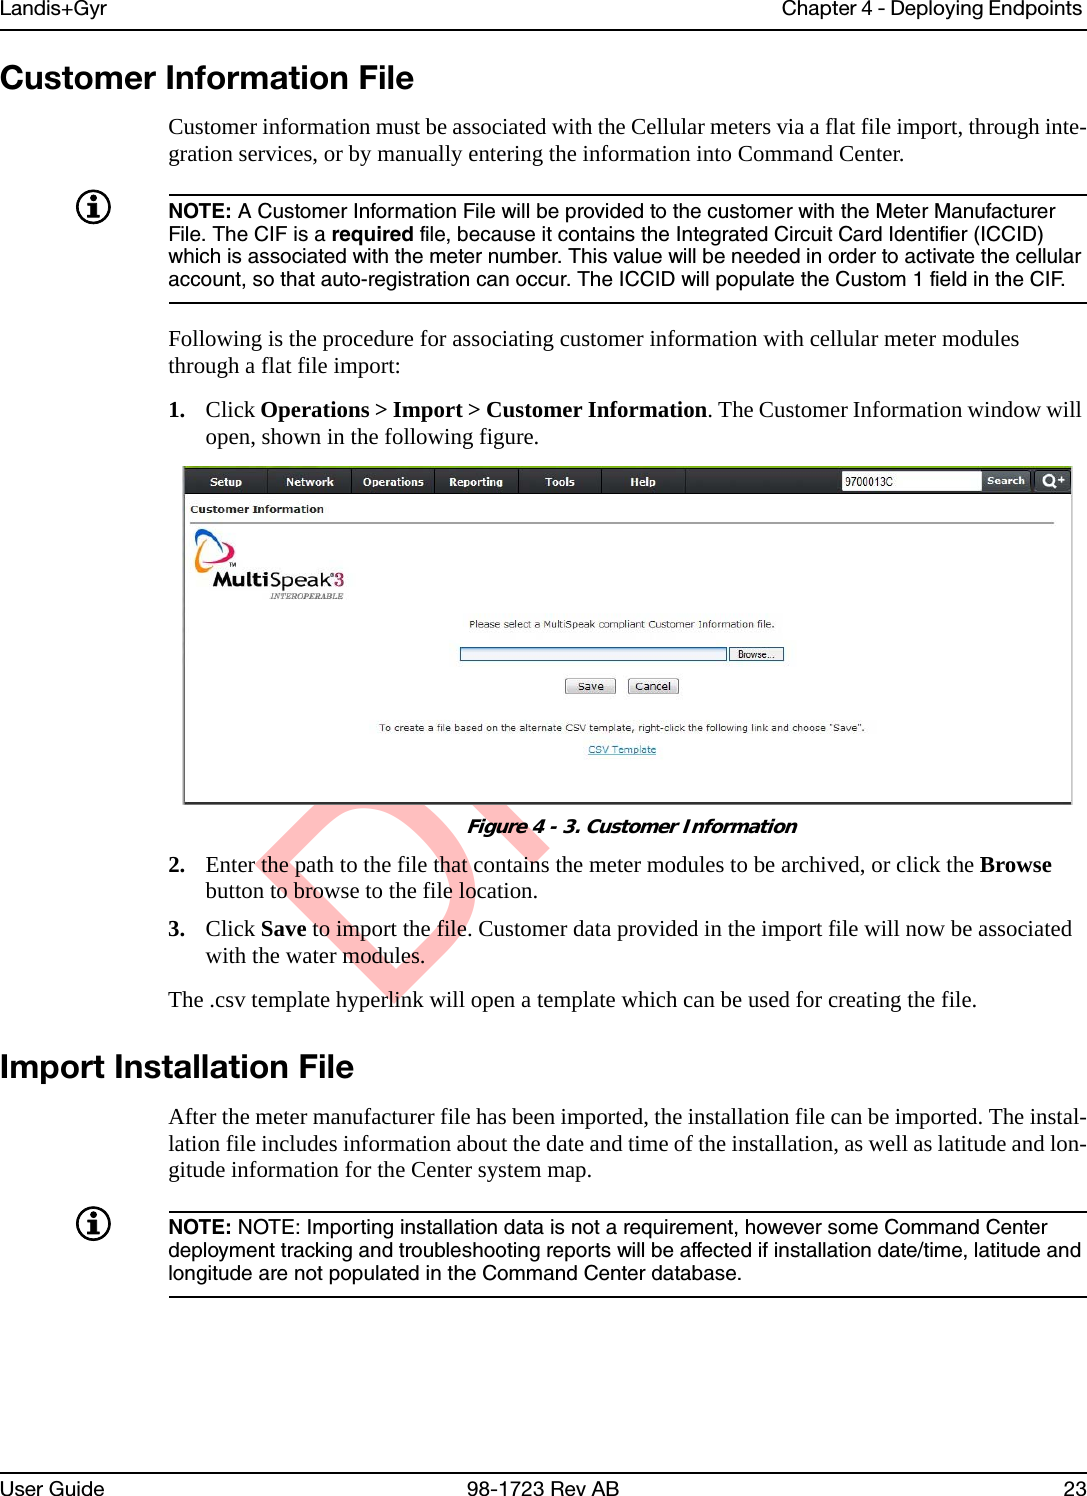 DraftLandis+Gyr Chapter 4 - Deploying Endpoints User Guide 98-1723 Rev AB 23Customer Information FileCustomer information must be associated with the Cellular meters via a flat file import, through inte-gration services, or by manually entering the information into Command Center.NOTE: A Customer Information File will be provided to the customer with the Meter Manufacturer File. The CIF is a required file, because it contains the Integrated Circuit Card Identifier (ICCID) which is associated with the meter number. This value will be needed in order to activate the cellular account, so that auto-registration can occur. The ICCID will populate the Custom 1 field in the CIF.Following is the procedure for associating customer information with cellular meter modules through a flat file import:1. Click Operations &gt; Import &gt; Customer Information. The Customer Information window will open, shown in the following figure. Figure 4 - 3. Customer Information2. Enter the path to the file that contains the meter modules to be archived, or click the Browse button to browse to the file location.3. Click Save to import the file. Customer data provided in the import file will now be associated with the water modules.The .csv template hyperlink will open a template which can be used for creating the file.Import Installation FileAfter the meter manufacturer file has been imported, the installation file can be imported. The instal-lation file includes information about the date and time of the installation, as well as latitude and lon-gitude information for the Center system map. NOTE: NOTE: Importing installation data is not a requirement, however some Command Center deployment tracking and troubleshooting reports will be affected if installation date/time, latitude and longitude are not populated in the Command Center database.